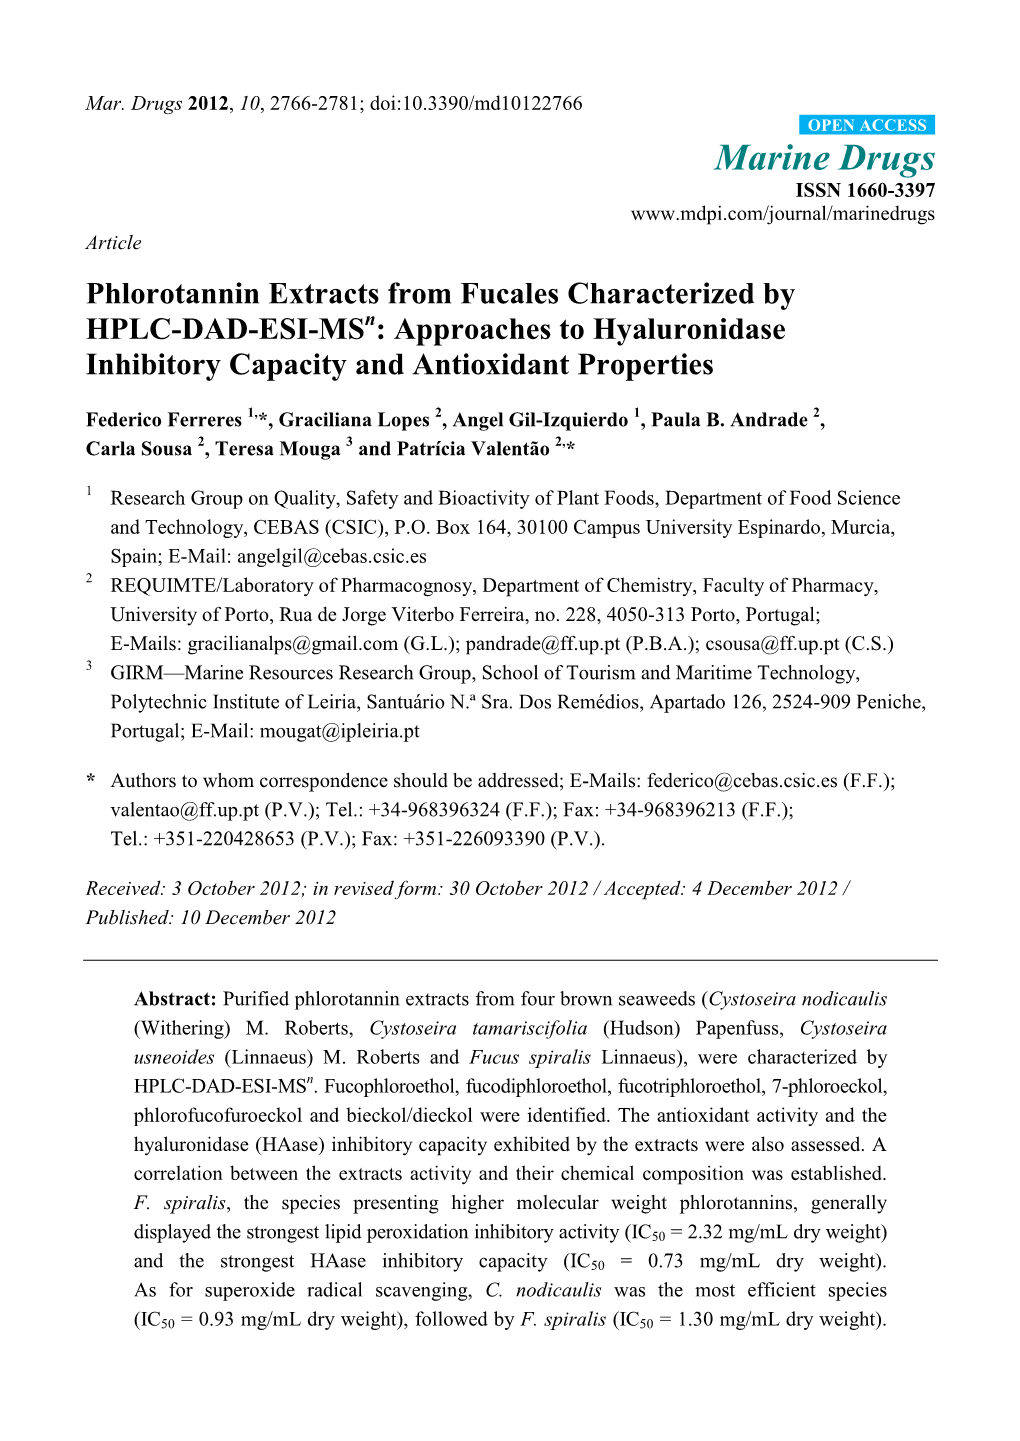 Phlorotannin Extracts from Fucales Characterized by HPLC-DAD-ESI-Msn: Approaches to Hyaluronidase Inhibitory Capacity and Antioxidant Properties